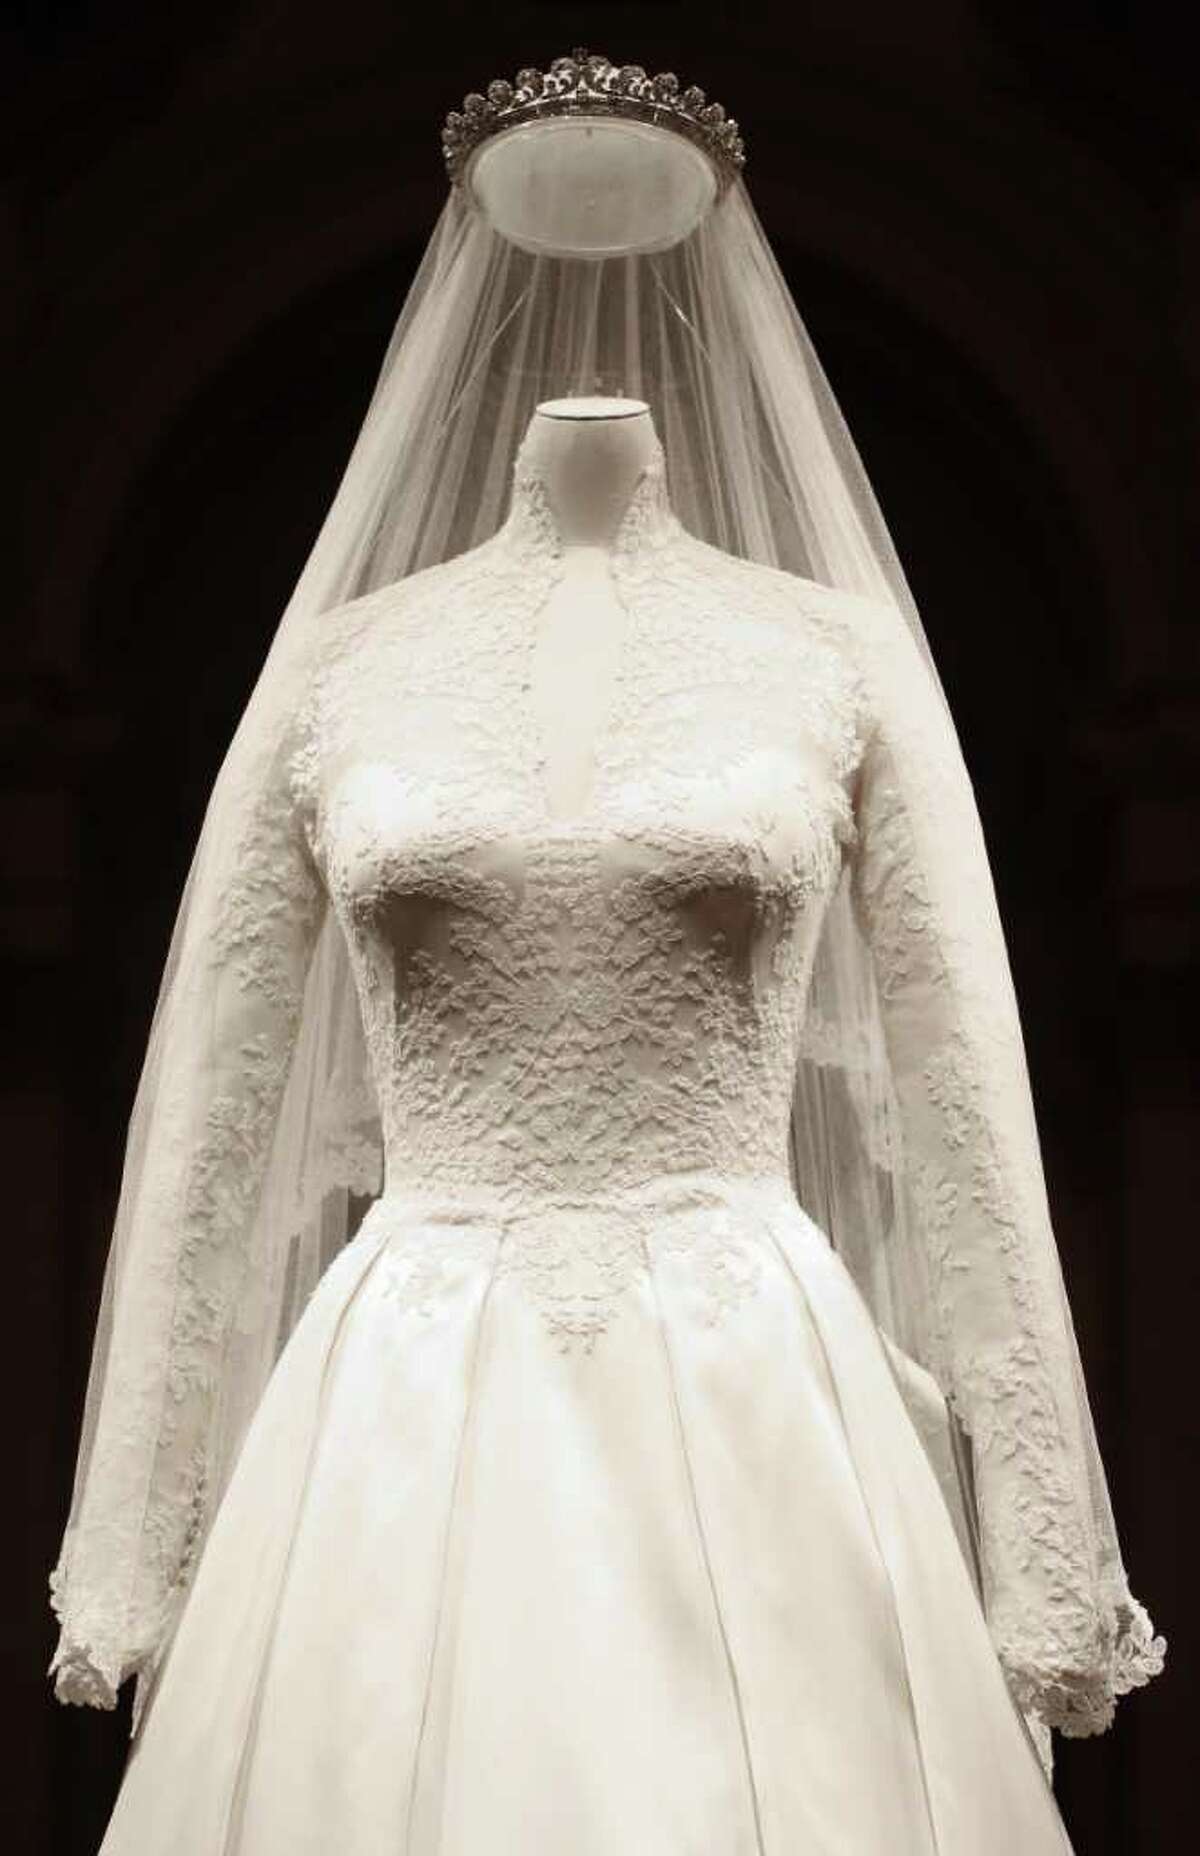 The Duchess of Cambridge's wedding dress, designed by Sarah Burton for Alexander McQueen, is seen in Buckingham Palace, London, Wednesday July 20, 2011, before going on display to the public during the palace's annual summer opening. The intricately decorated wedding dress received a rapturous reception. For months, it was fashion's best-kept secret. Even the team of embroiderers at Hampton Court Palace working on the gown did not know the identity of the designer until shortly before the public announcement. But as soon as the Duchess appeared leaving the Goring Hotel and then entering Westminster Abbey on her wedding day on April 29, the secret was out. The bridal gown featured lace appliqua floral detail and was made of ivory and white satin gazar, with a skirt that resembled "an opening flower" with white satin gazar arches and pleats. Its train measured just 9ft - modest in comparison with many previous royal brides.